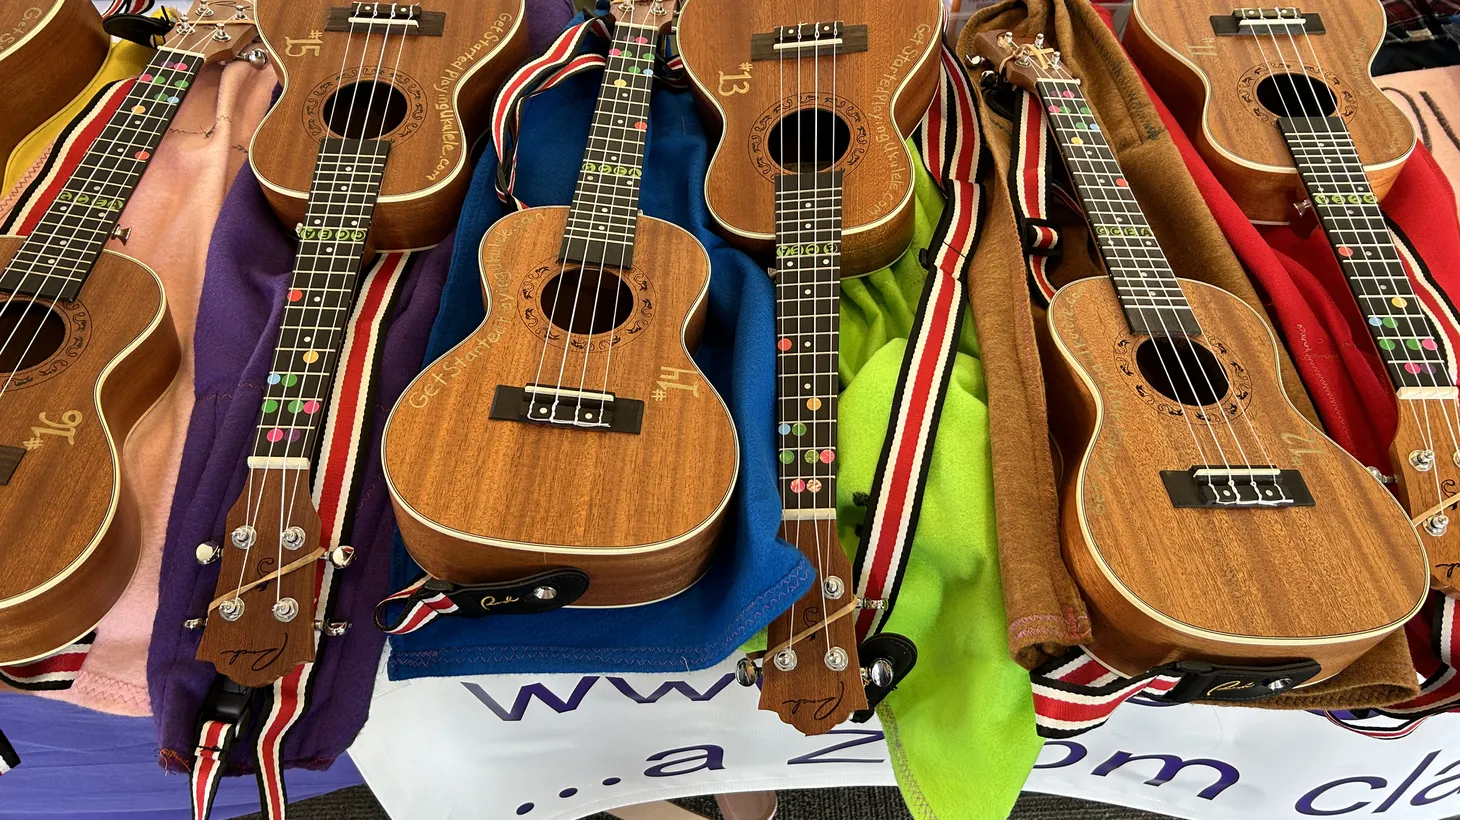 At the LA International Ukulele Festival, people can take free beginner workshops to learn how to play these stringed instruments. September 23, 2023.